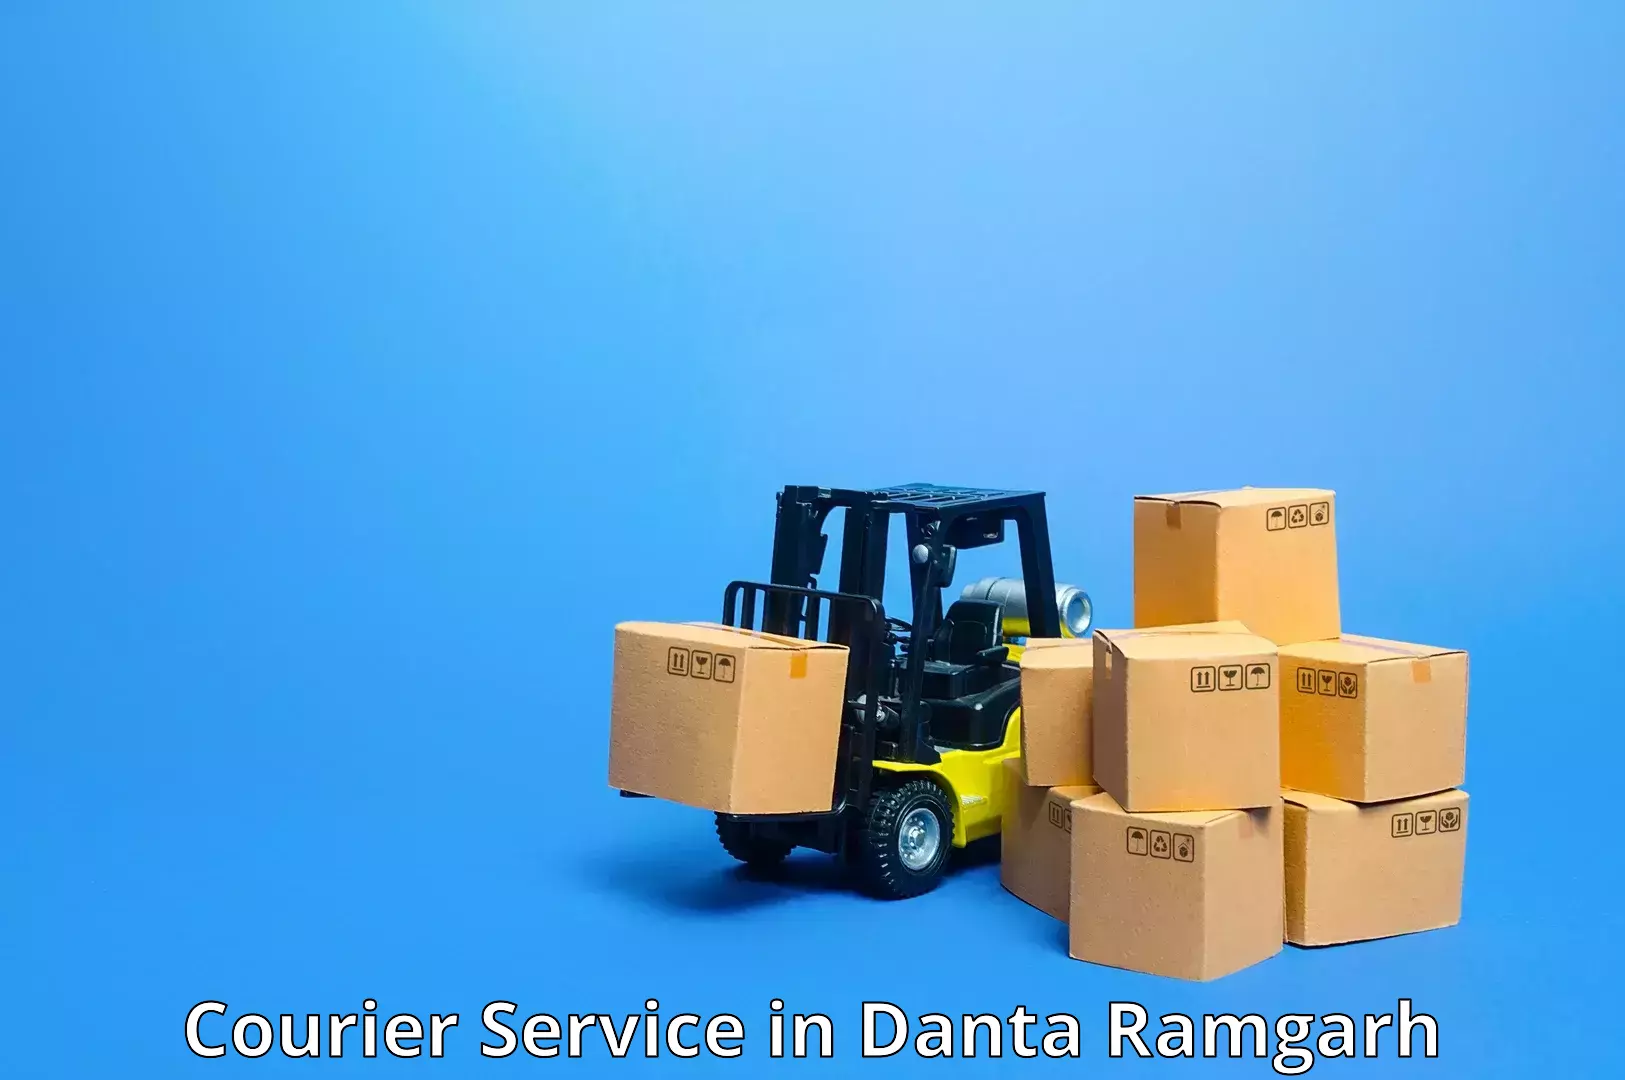 Expedited parcel delivery in Danta Ramgarh